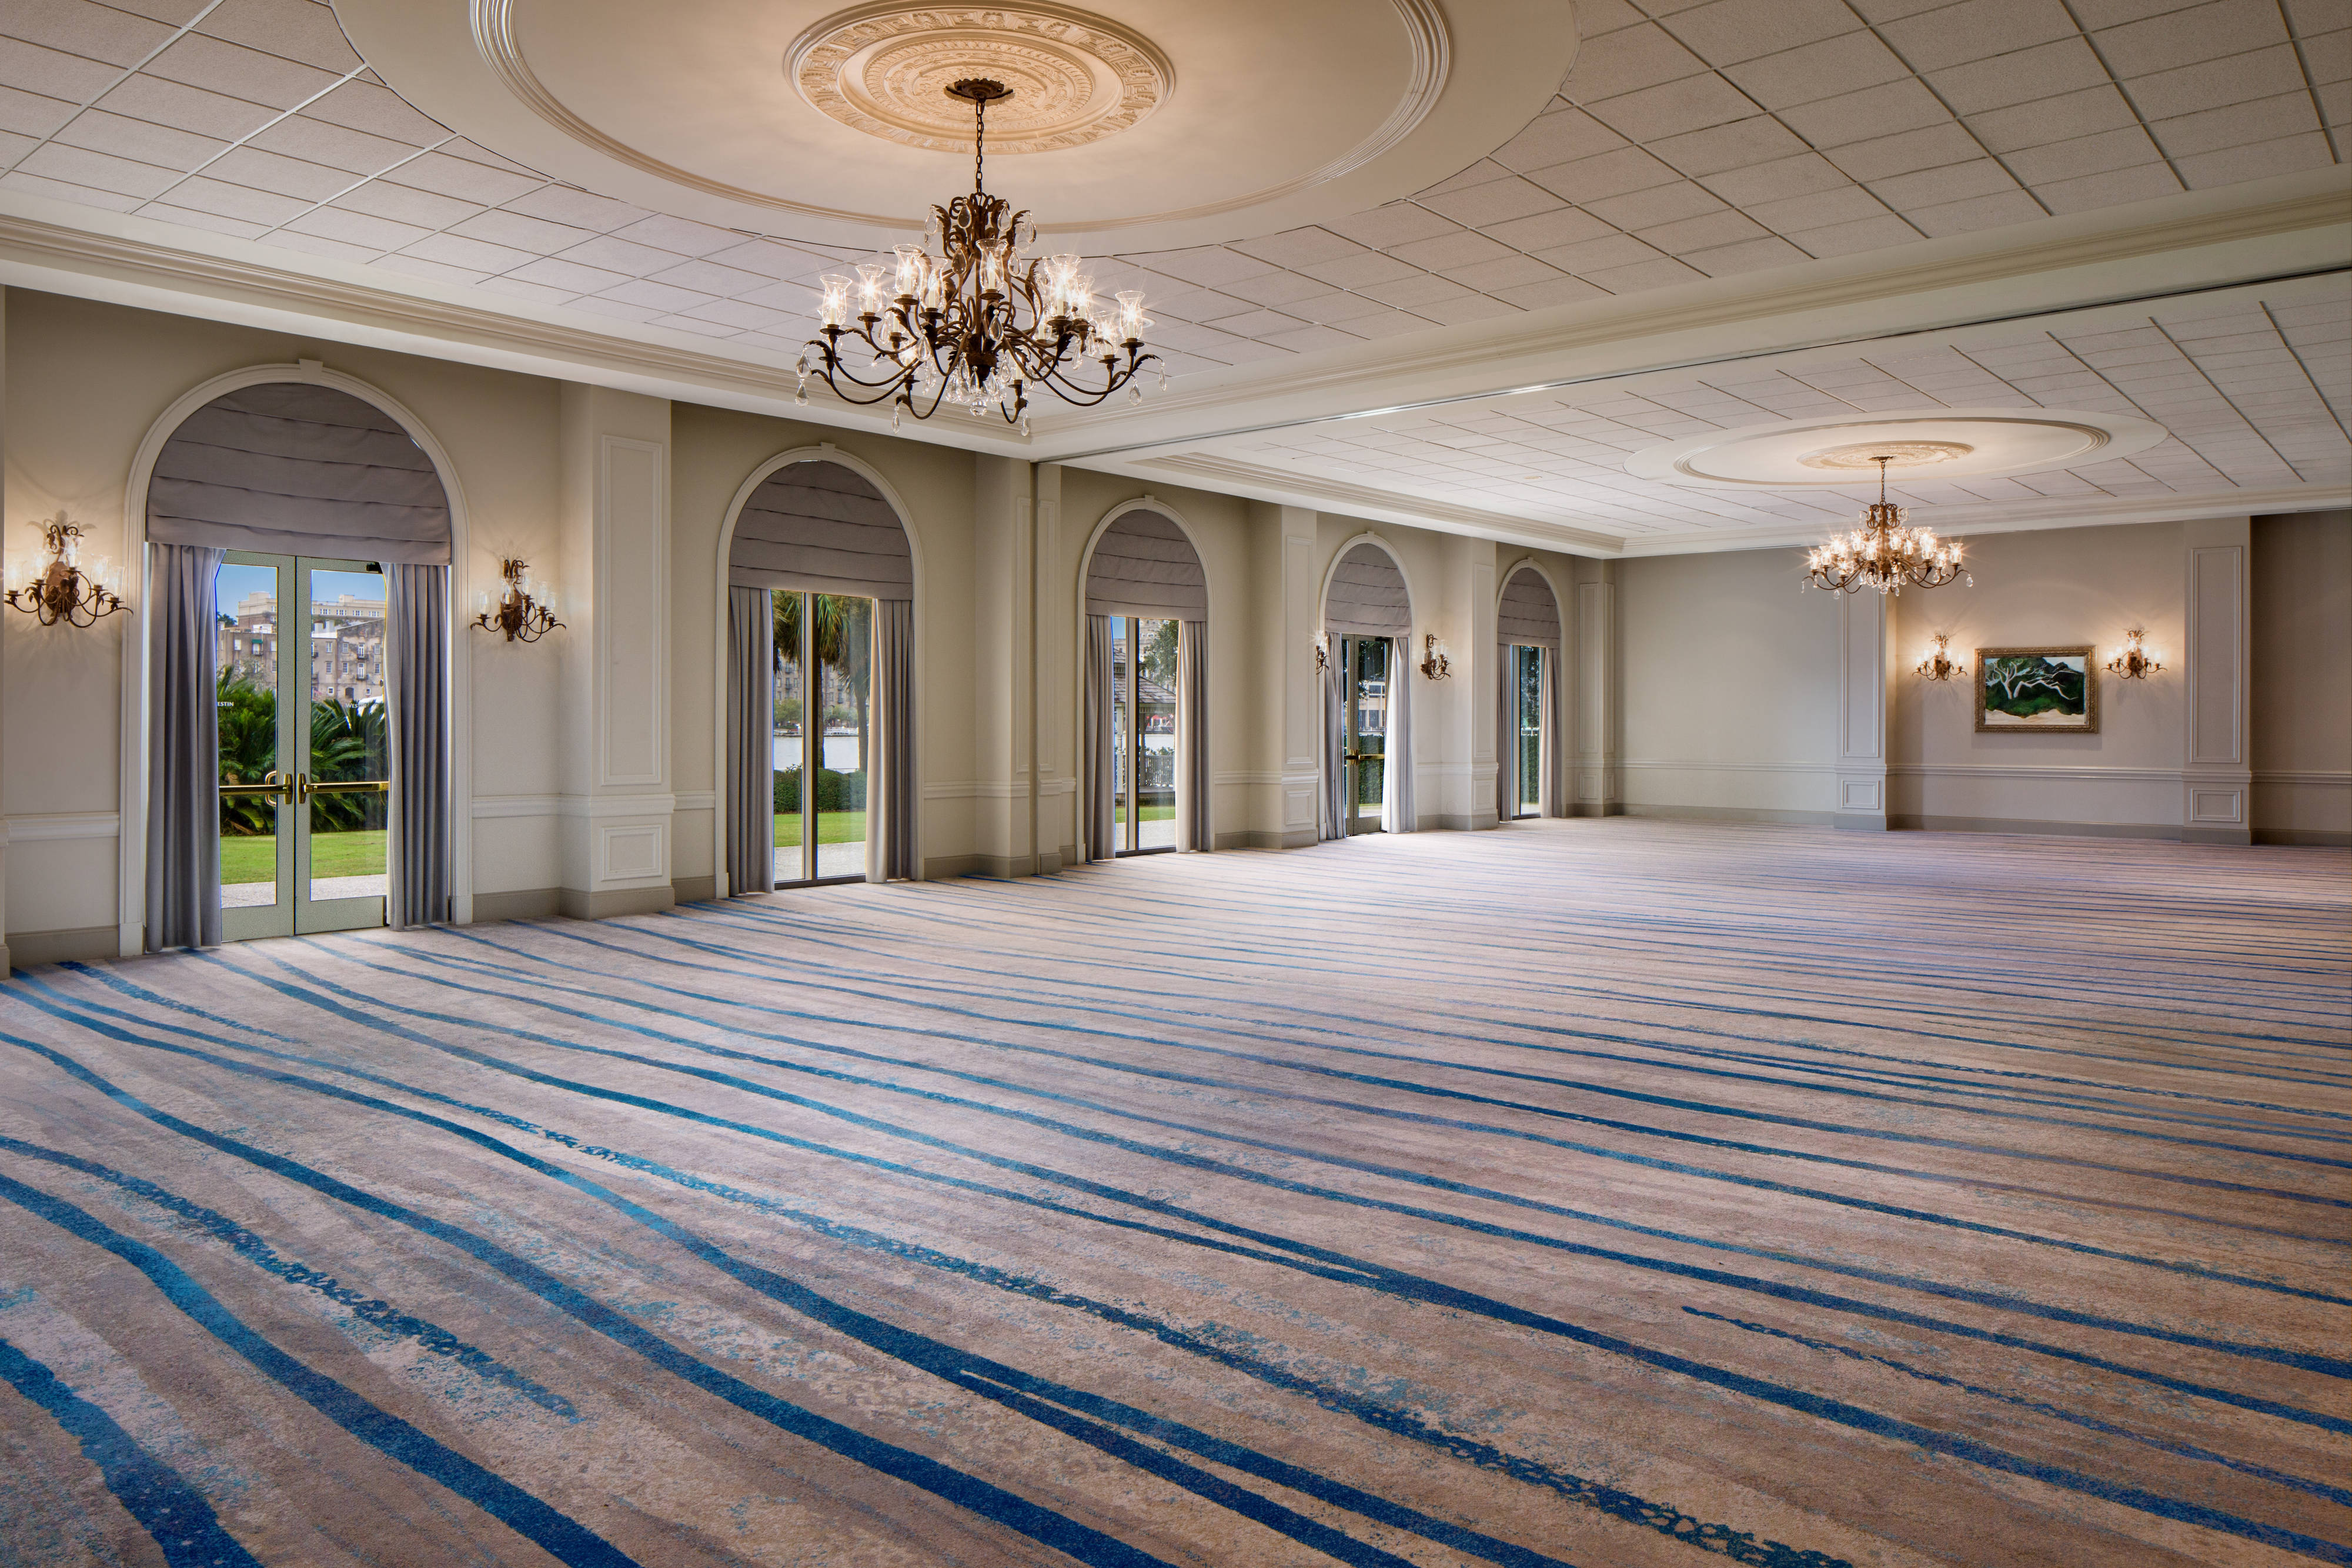 Carpeted ballroom with chandeliers and tall windows and glass doors offering a view